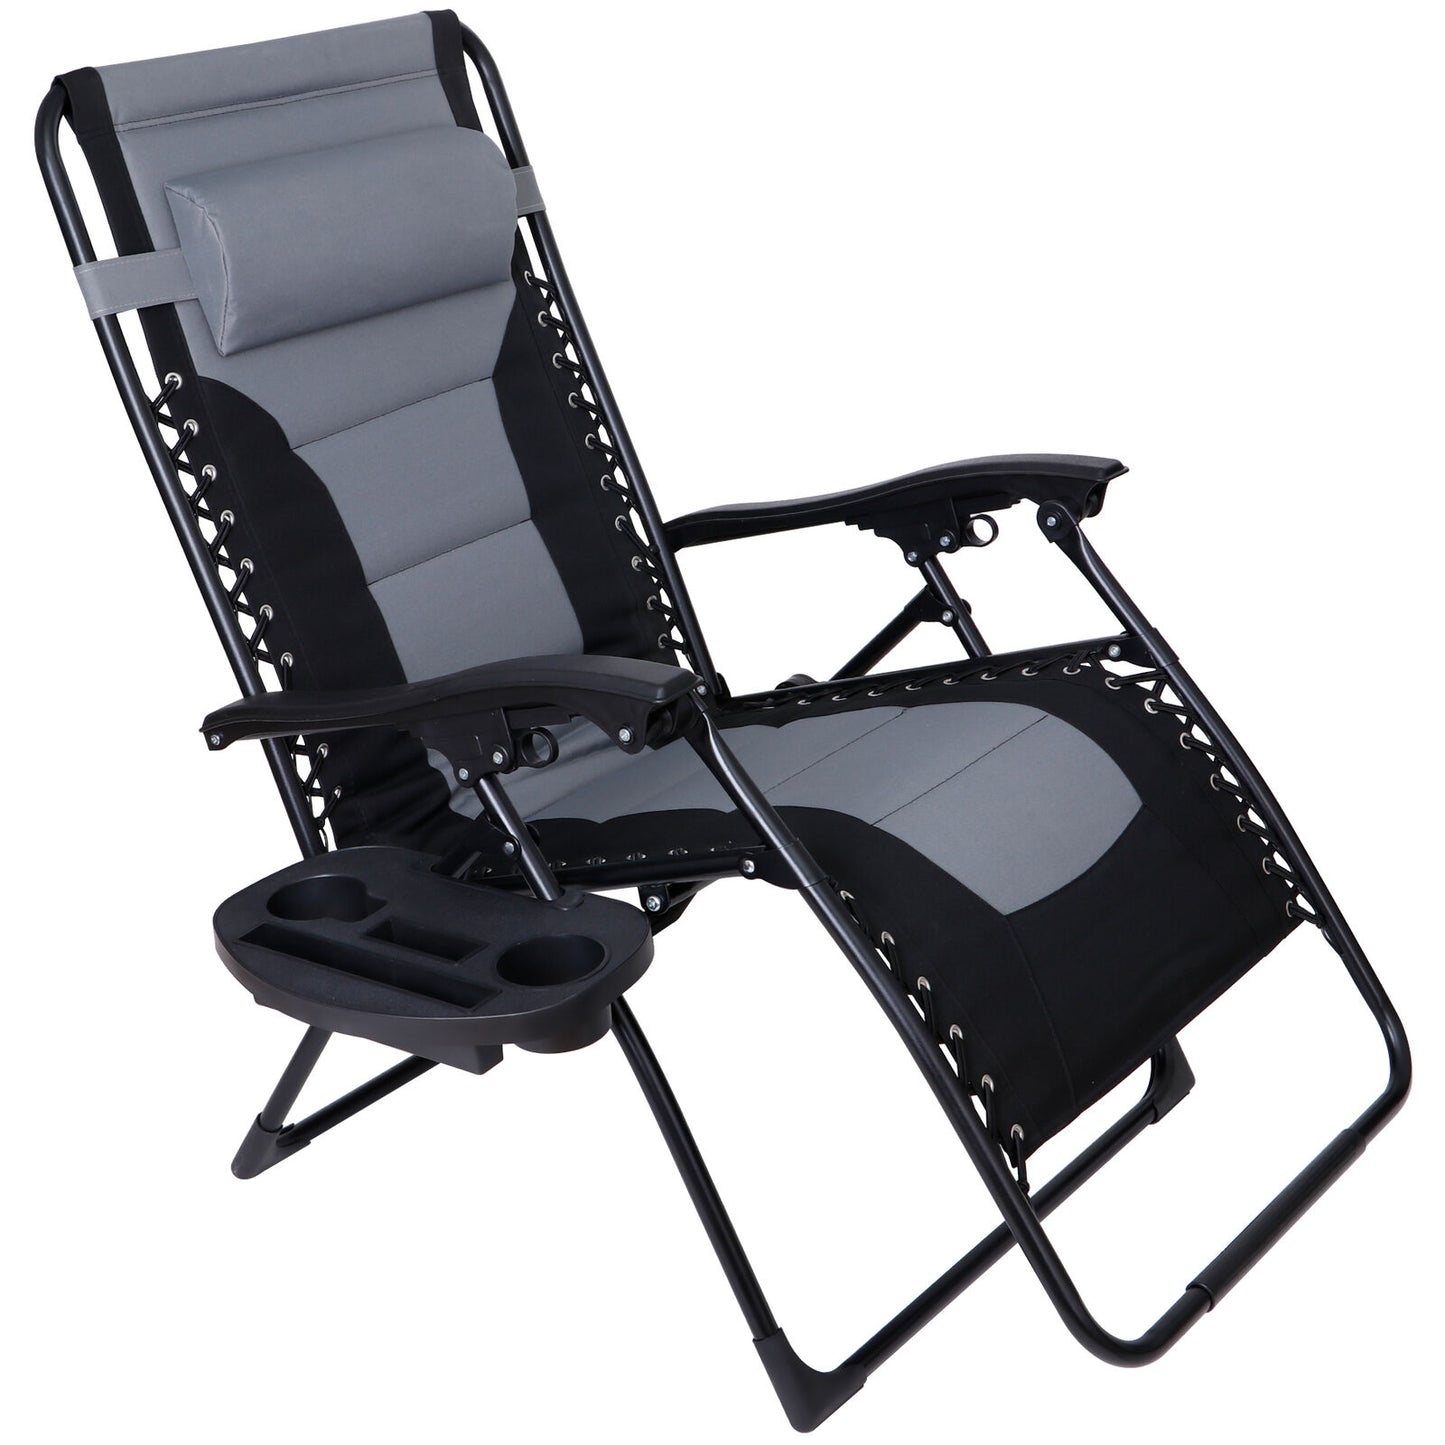 Set of 2 Zero Gravity Chair Oversized Folding Patio Padded Recliner Lounger Grey